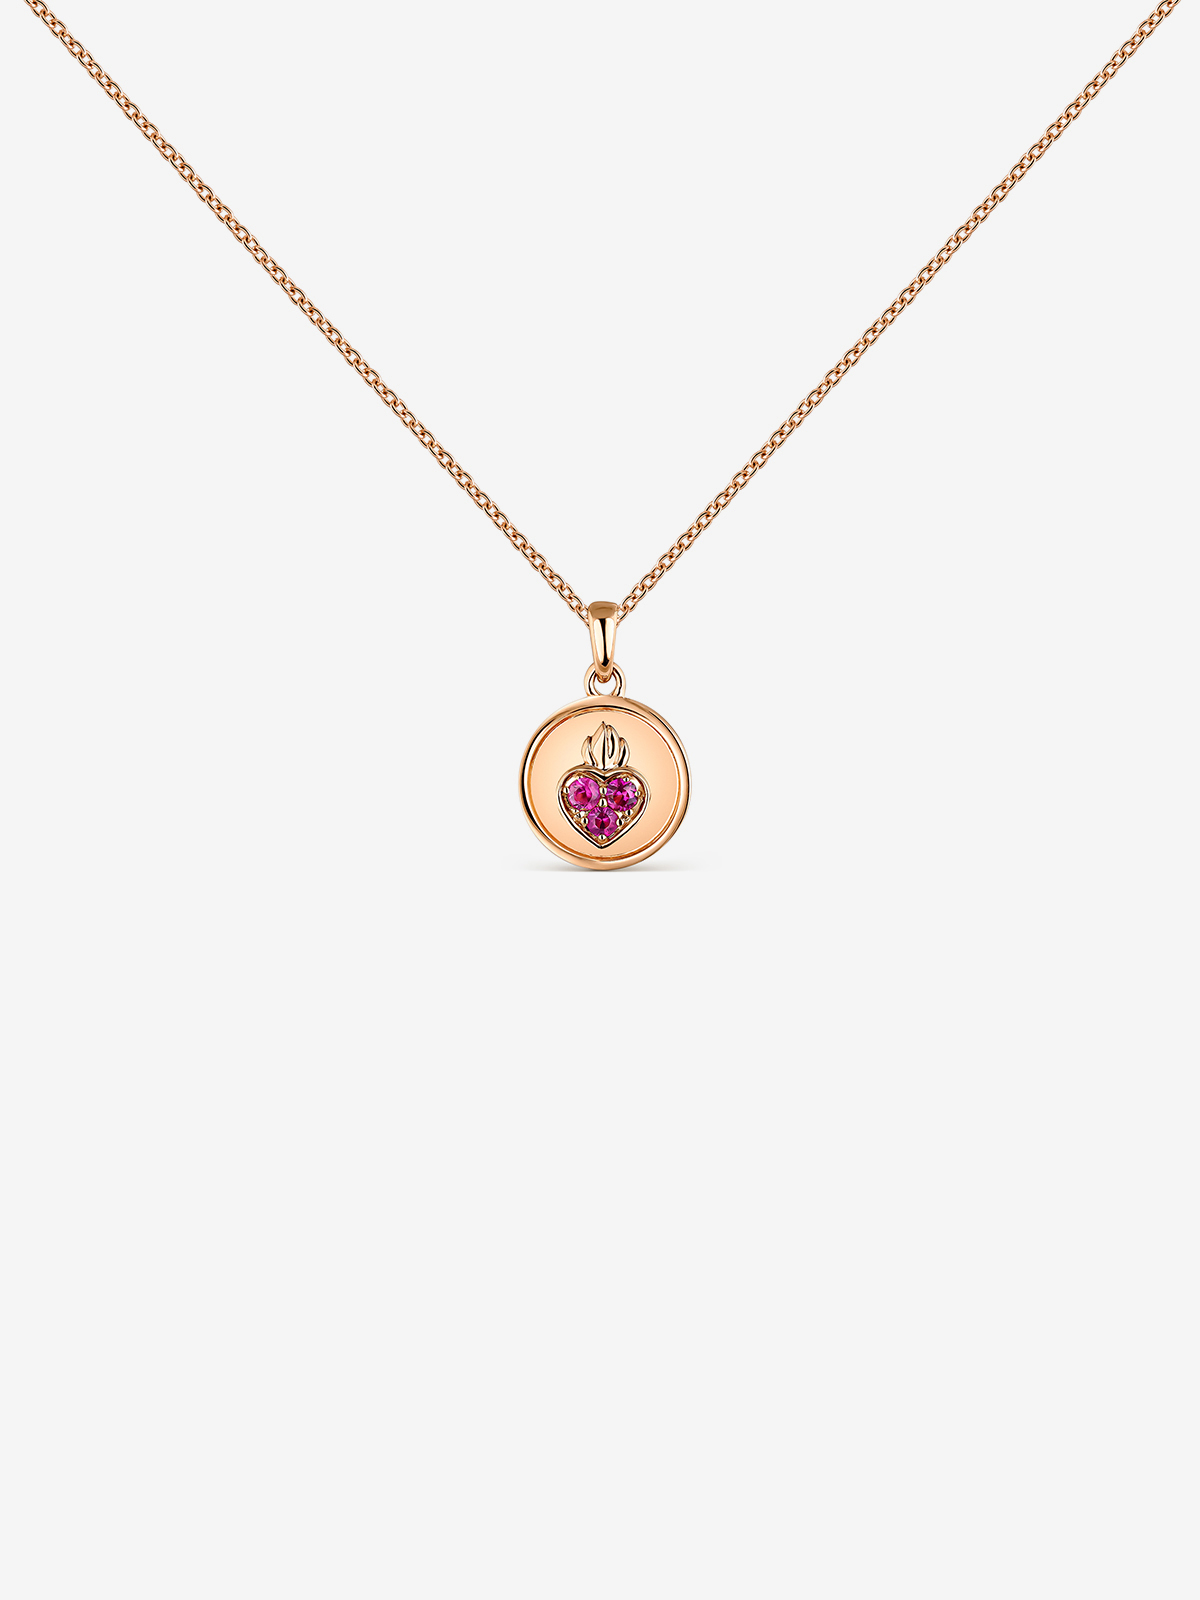 18kt rose gold pendant with sapphires